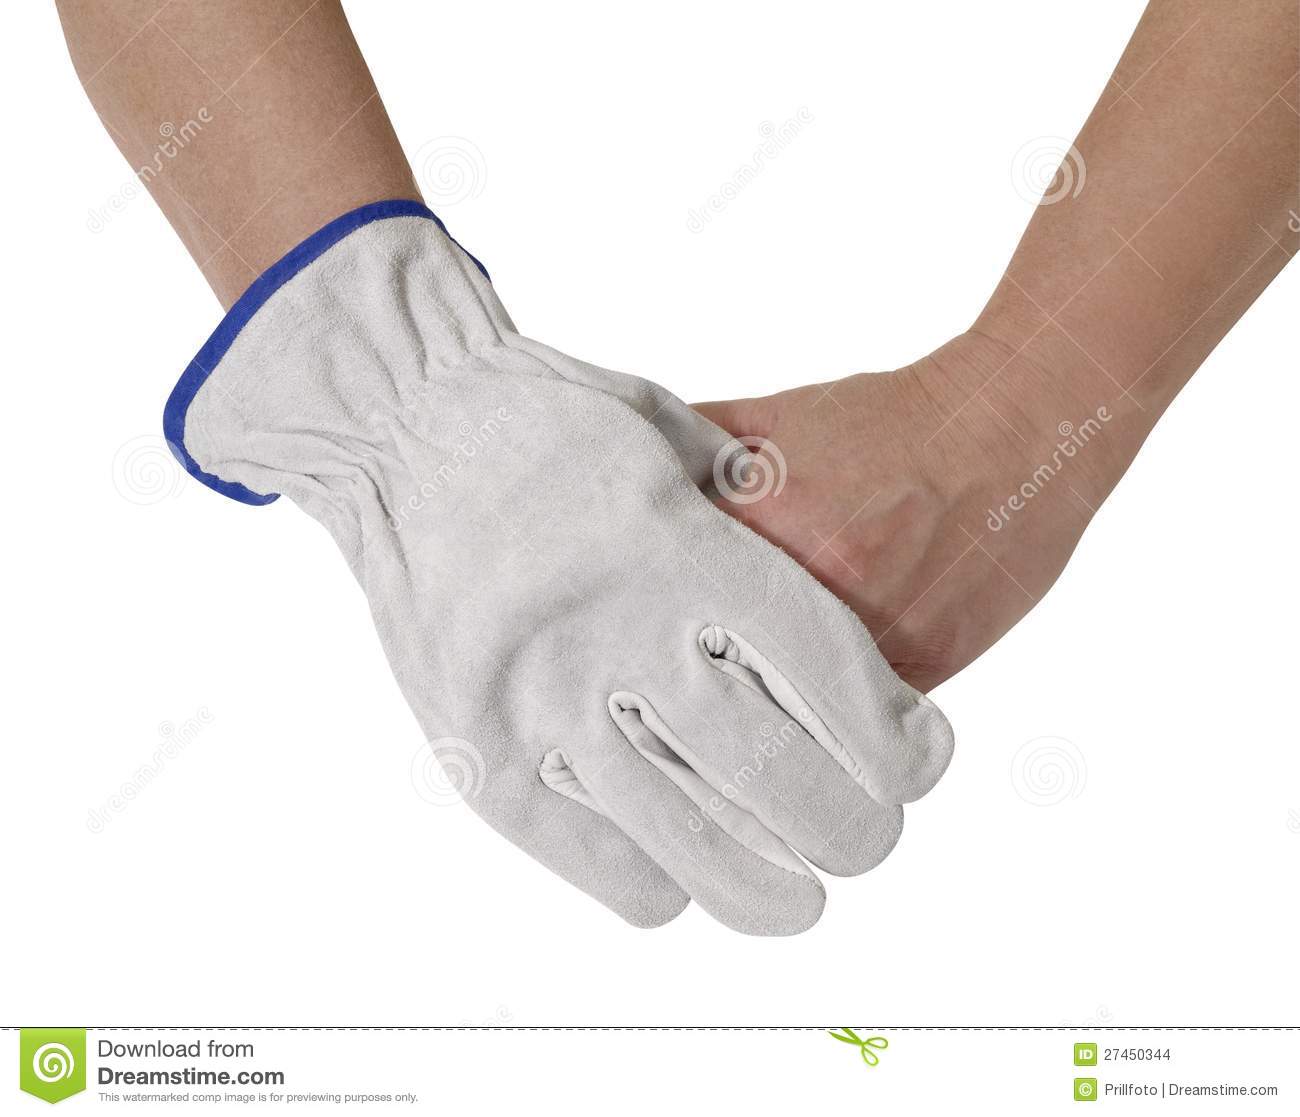 Hands Holding Each Other One Gloved With A Light Grey Working Glove